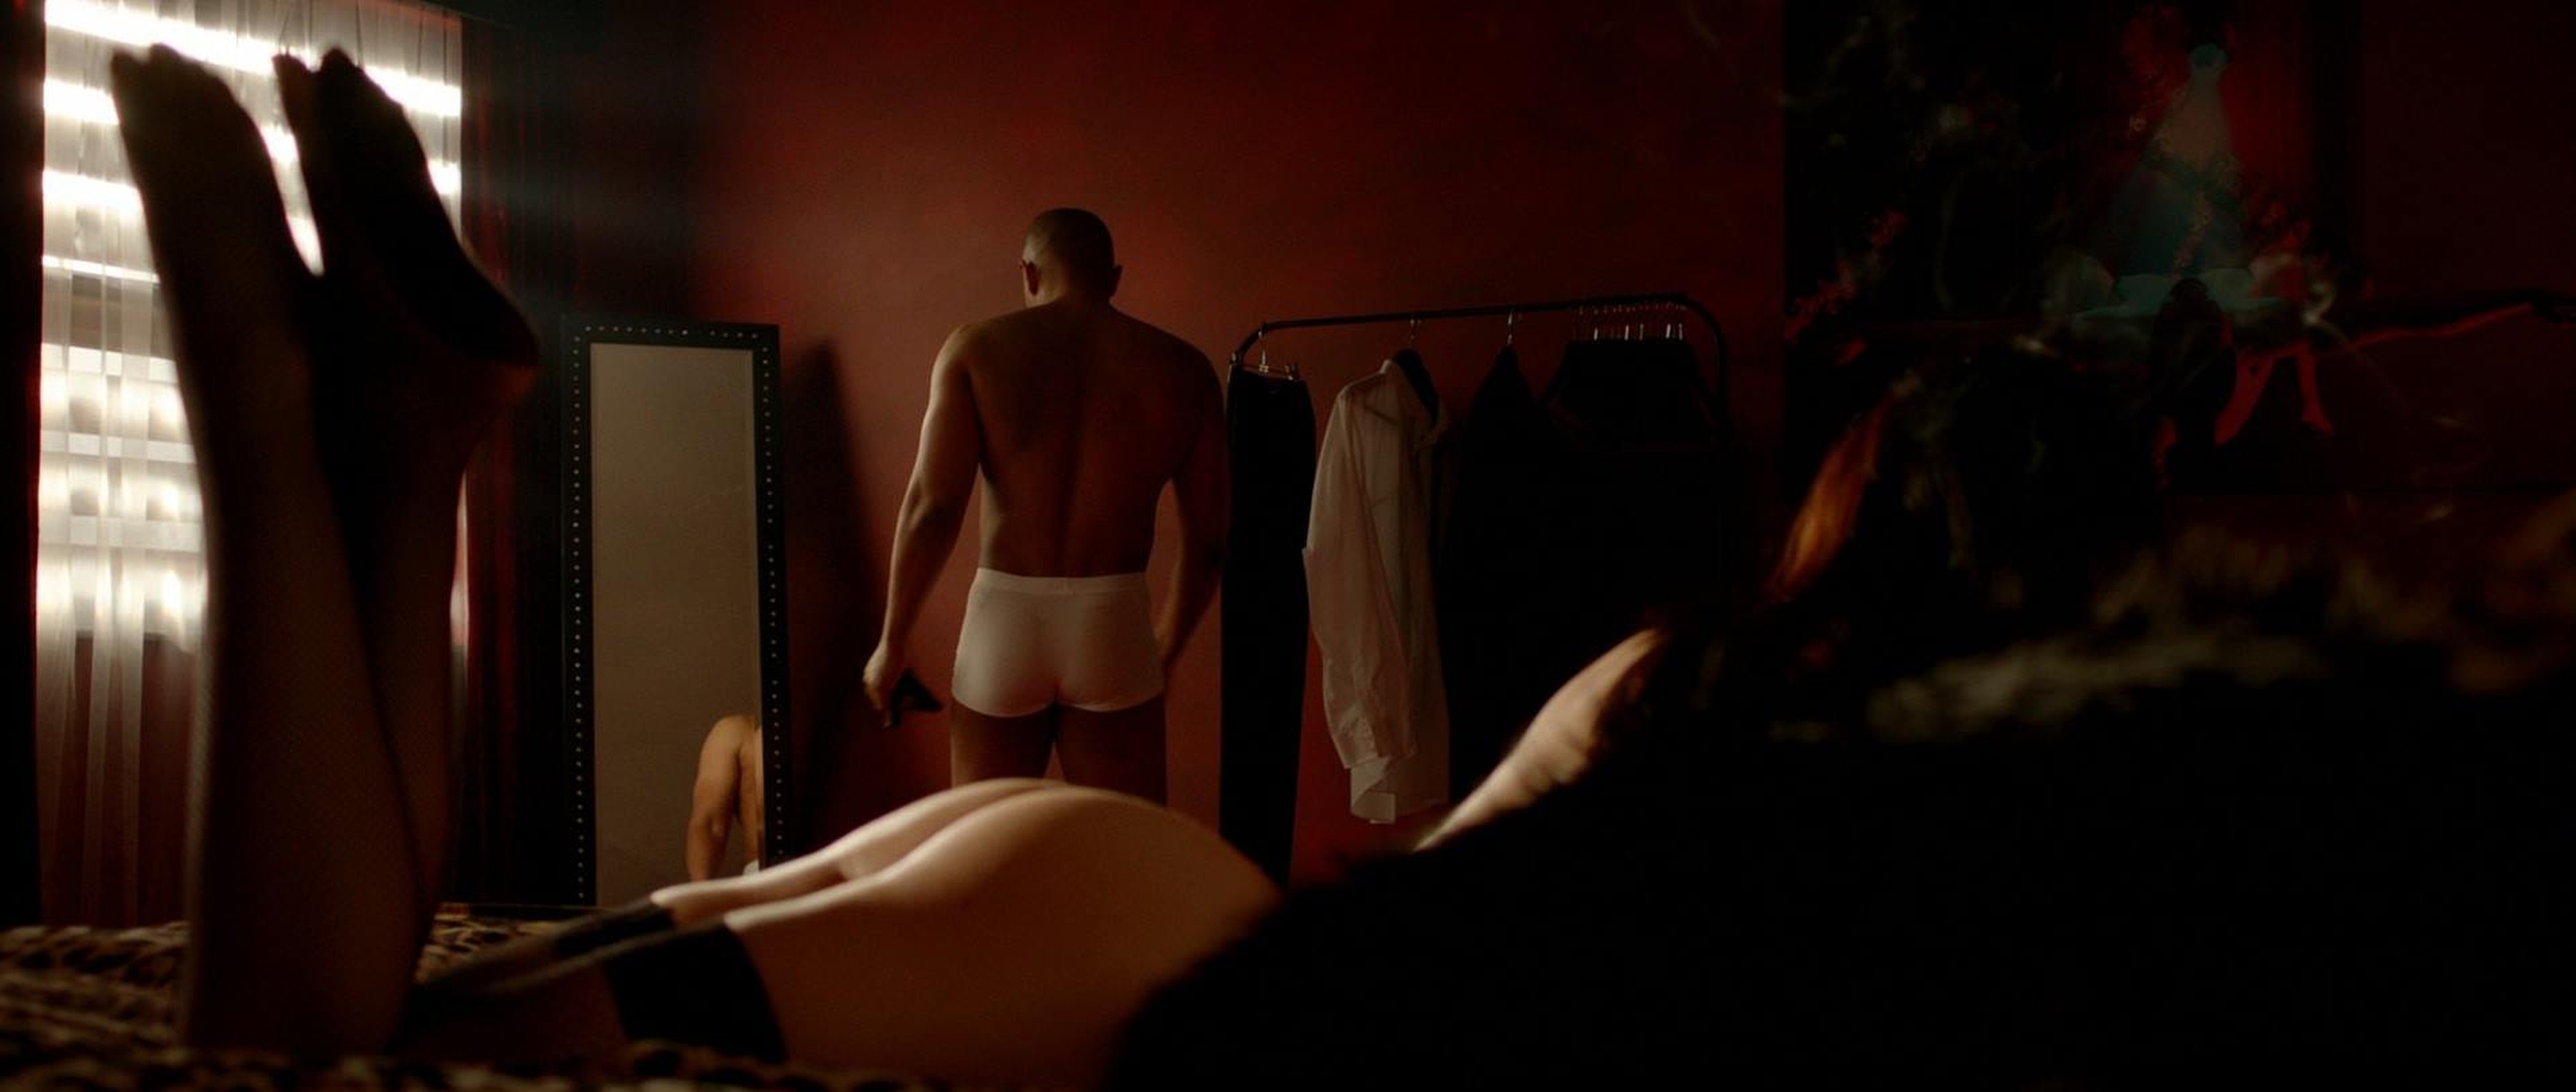 Naked Alexis Knapp In The Anomaly